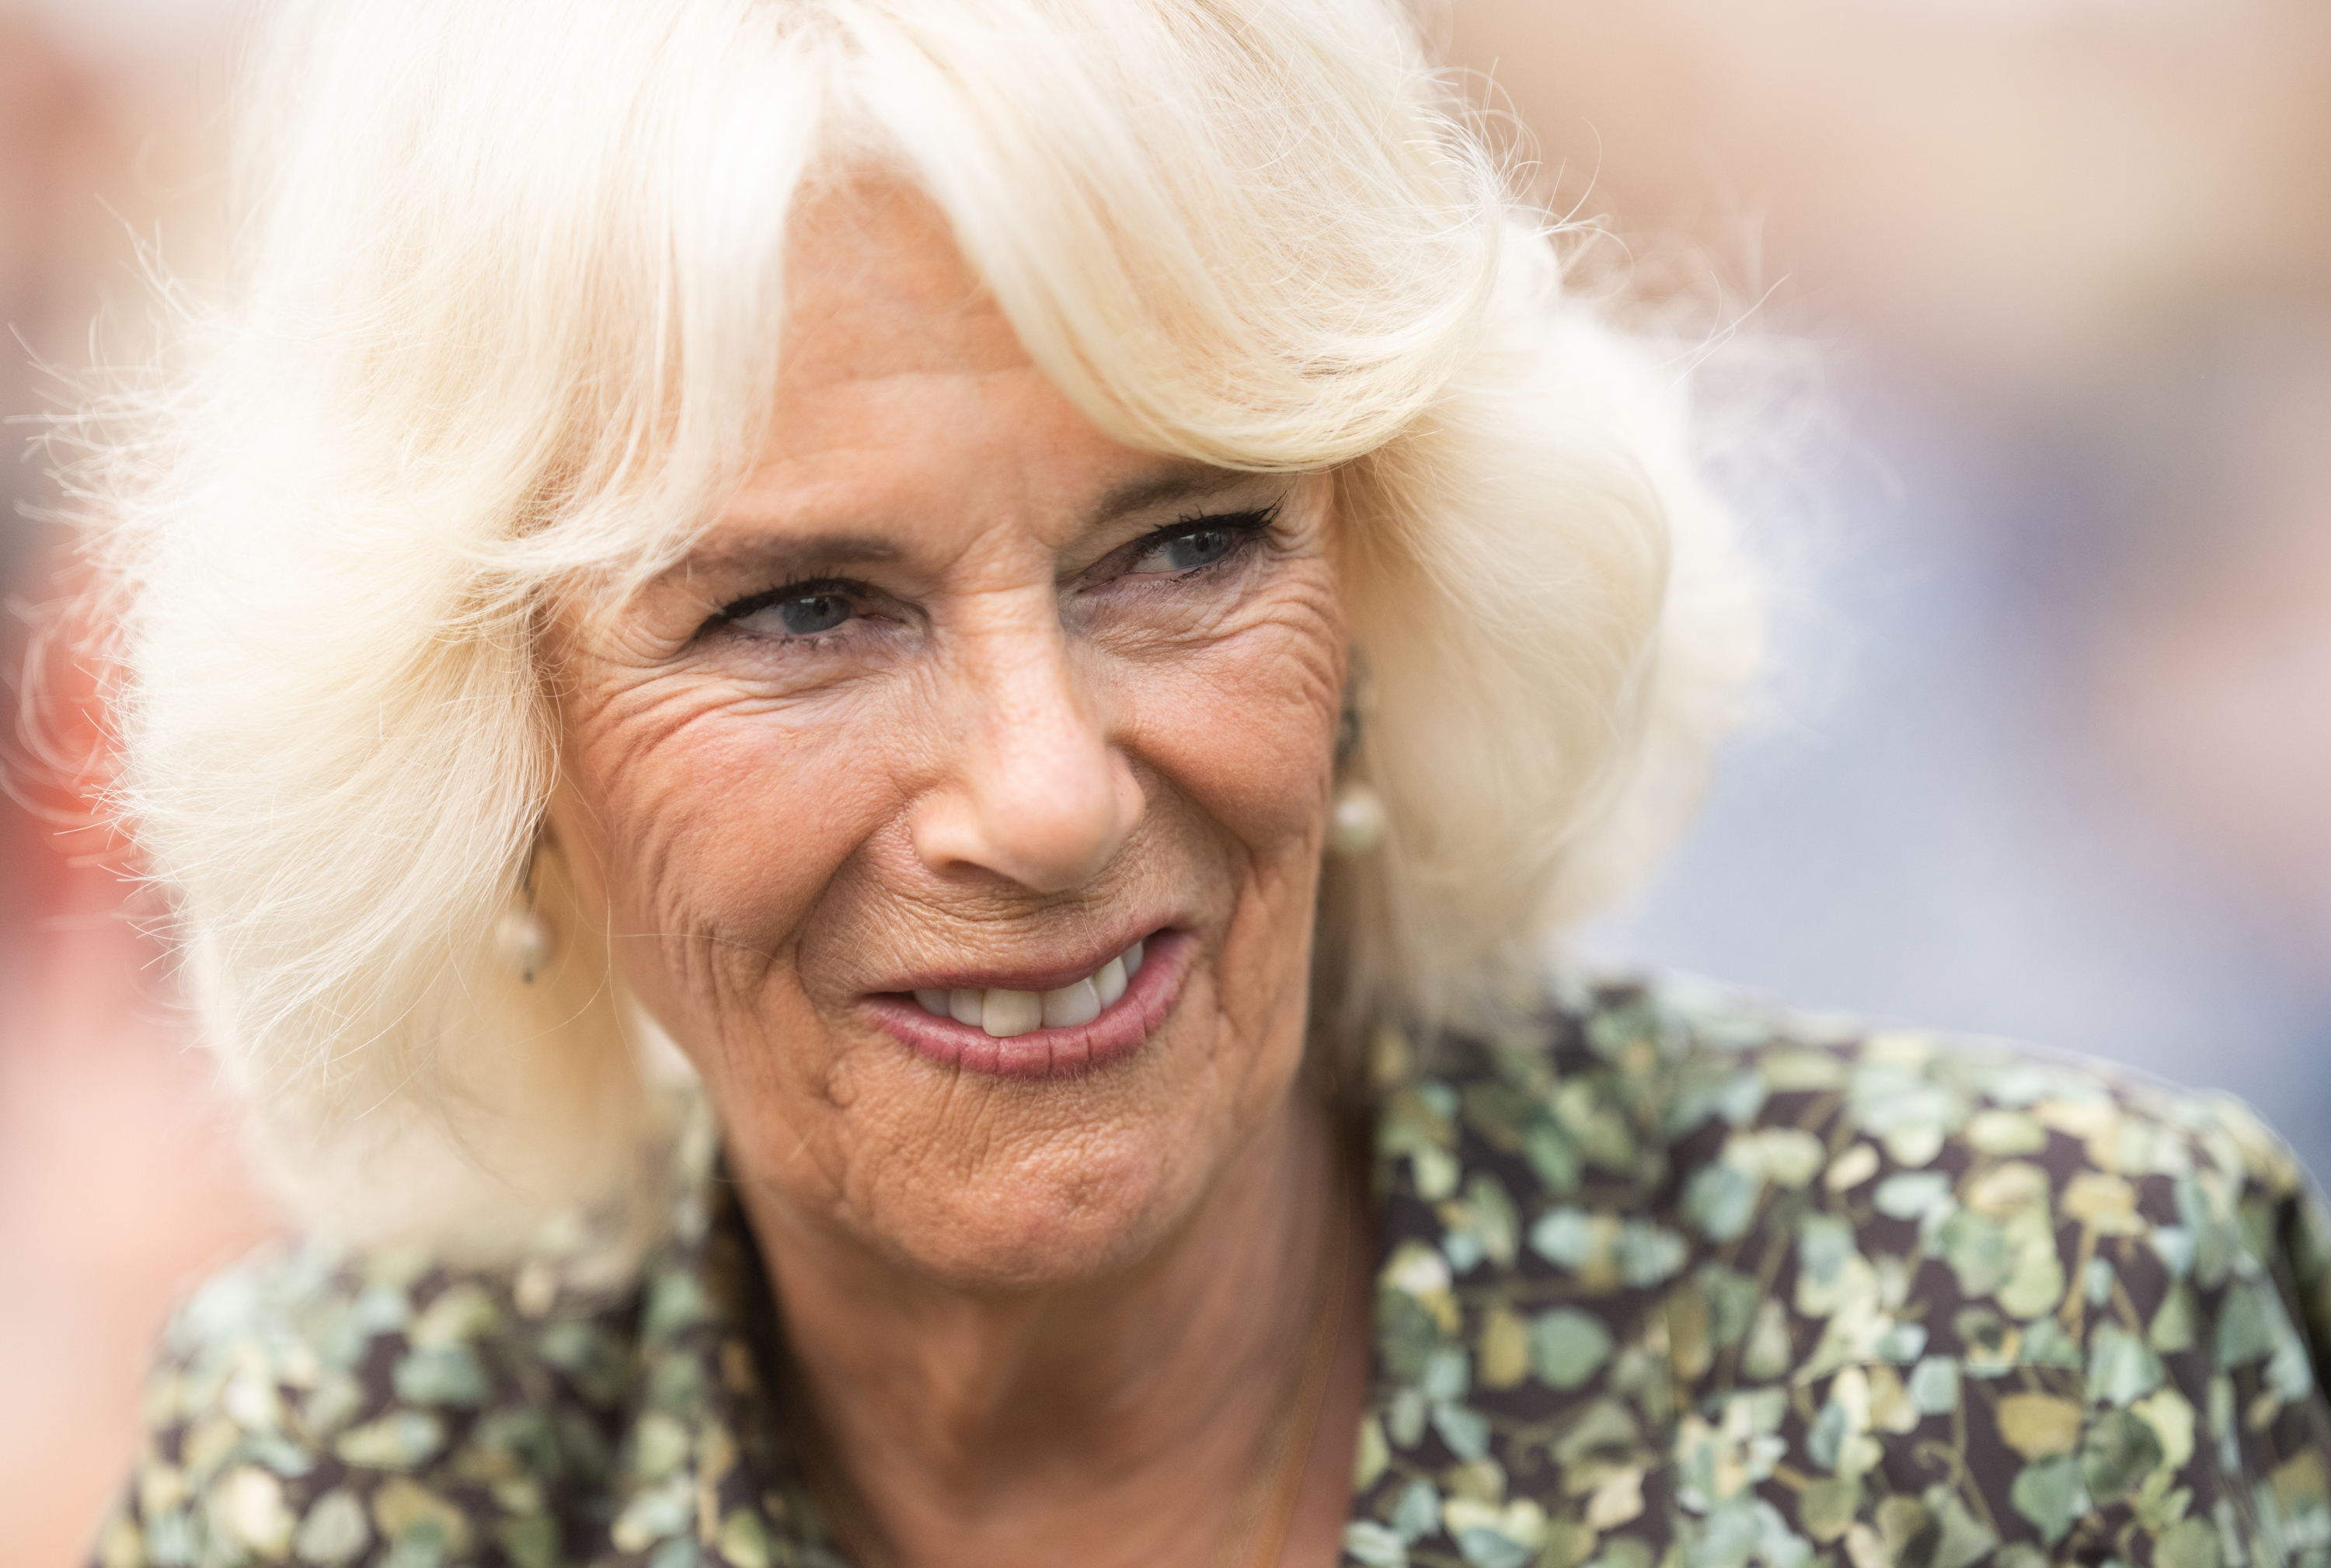 <p>Queen Camilla visited the Sandringham Flower Show alongside husband King Charles III (not pictured) at Sandringham House in King's Lynn, England, on July 26, 2023.</p>